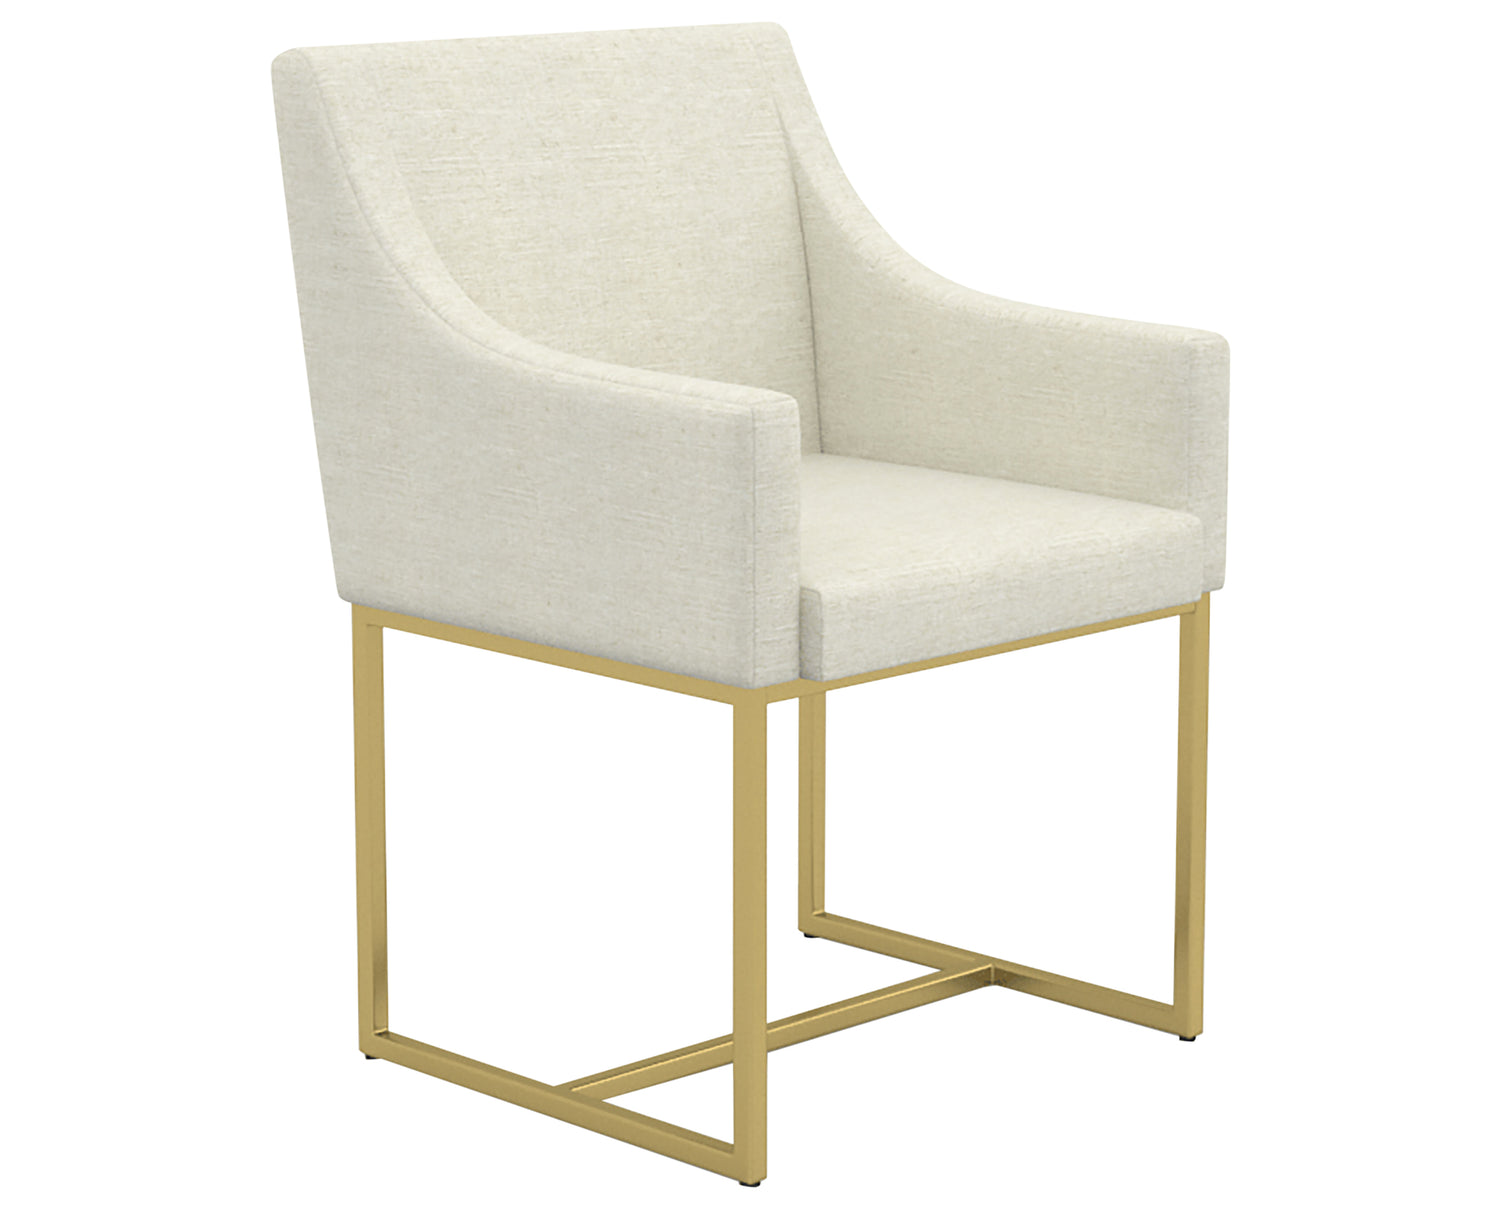 GL Metal Gold & Fabric TW | Canadel Modern Dining Chair | Valley Ridge Furniture